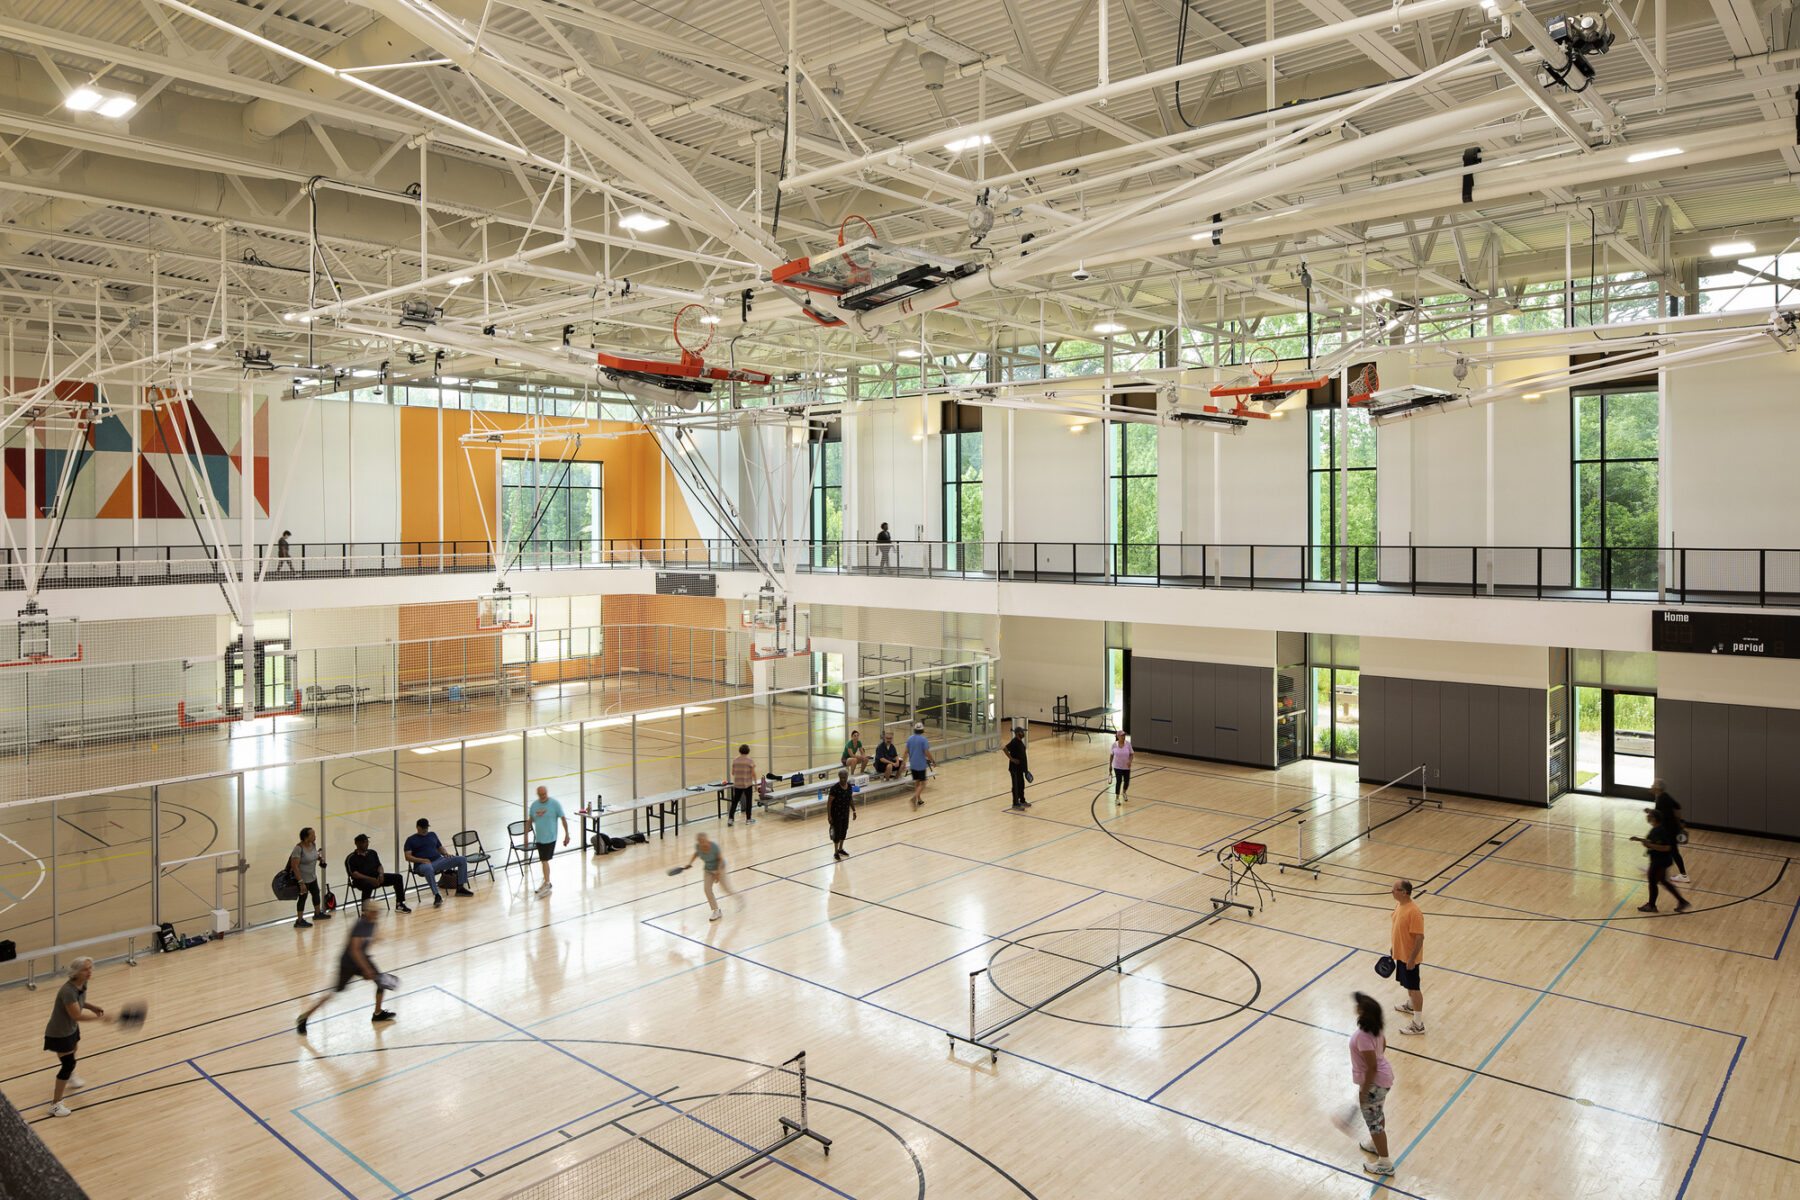 View from up on the indoor track looking down into the open gymnasium courts with natural light in the windows, and boldly colored geometric patterns on the far wall